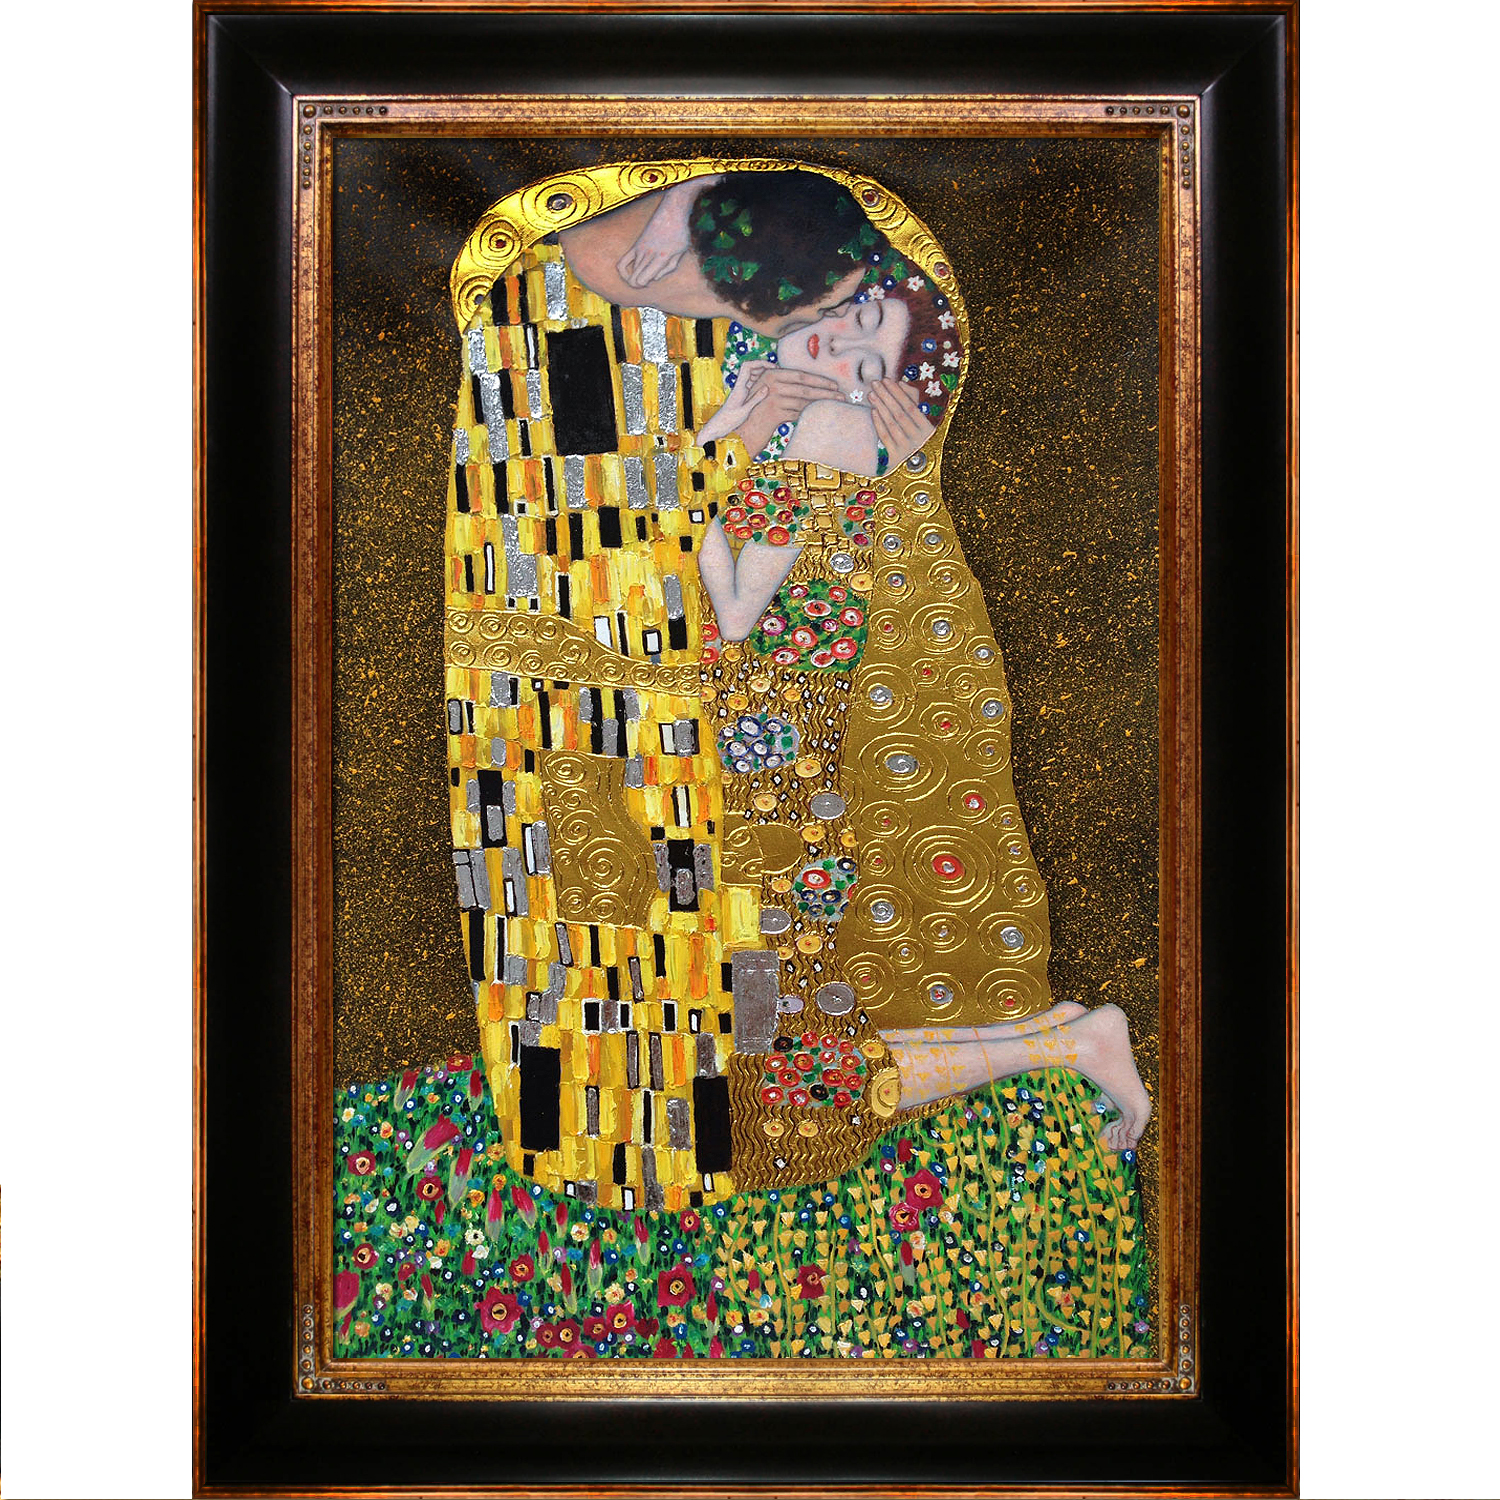 In Los Angeles art lovers purchase more of Gustav Klimt’s ‘The Kiss’ on overstockArt.com than any other.